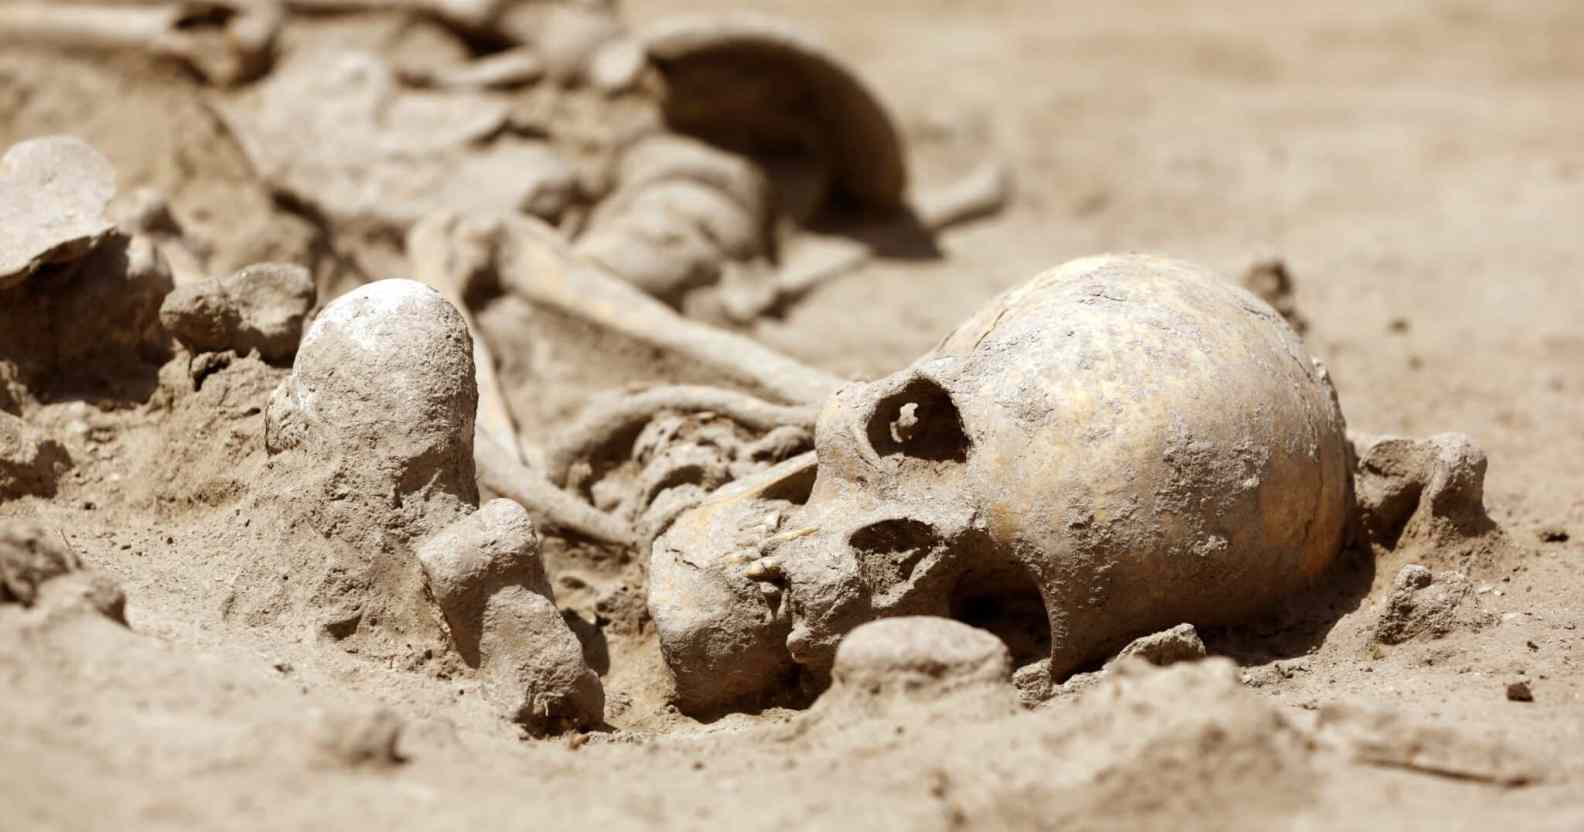 Archaeologists urged not to assume gender of ancient human remains